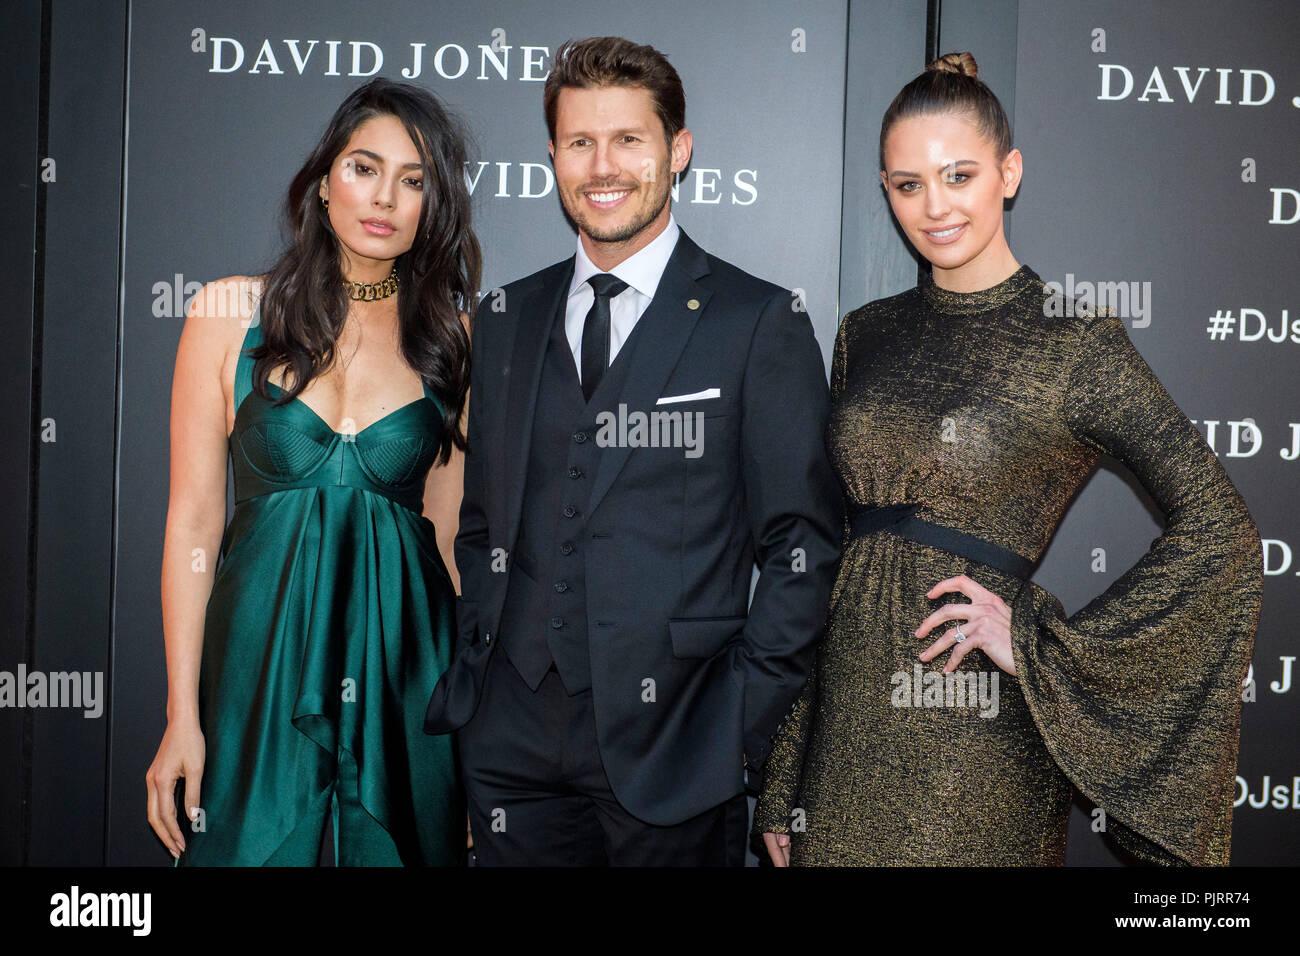 David Jones Ambassadors (L-R) Jessica Gomes, Jason Dundas and Jesinta Campbell poses for photographs during celebrations for the opening of  a new signature ‘boutique’ store in Barangaroo South on November 2, 2016 in Sydney, Australia.   (Photo by Hugh Peterswald) Stock Photo